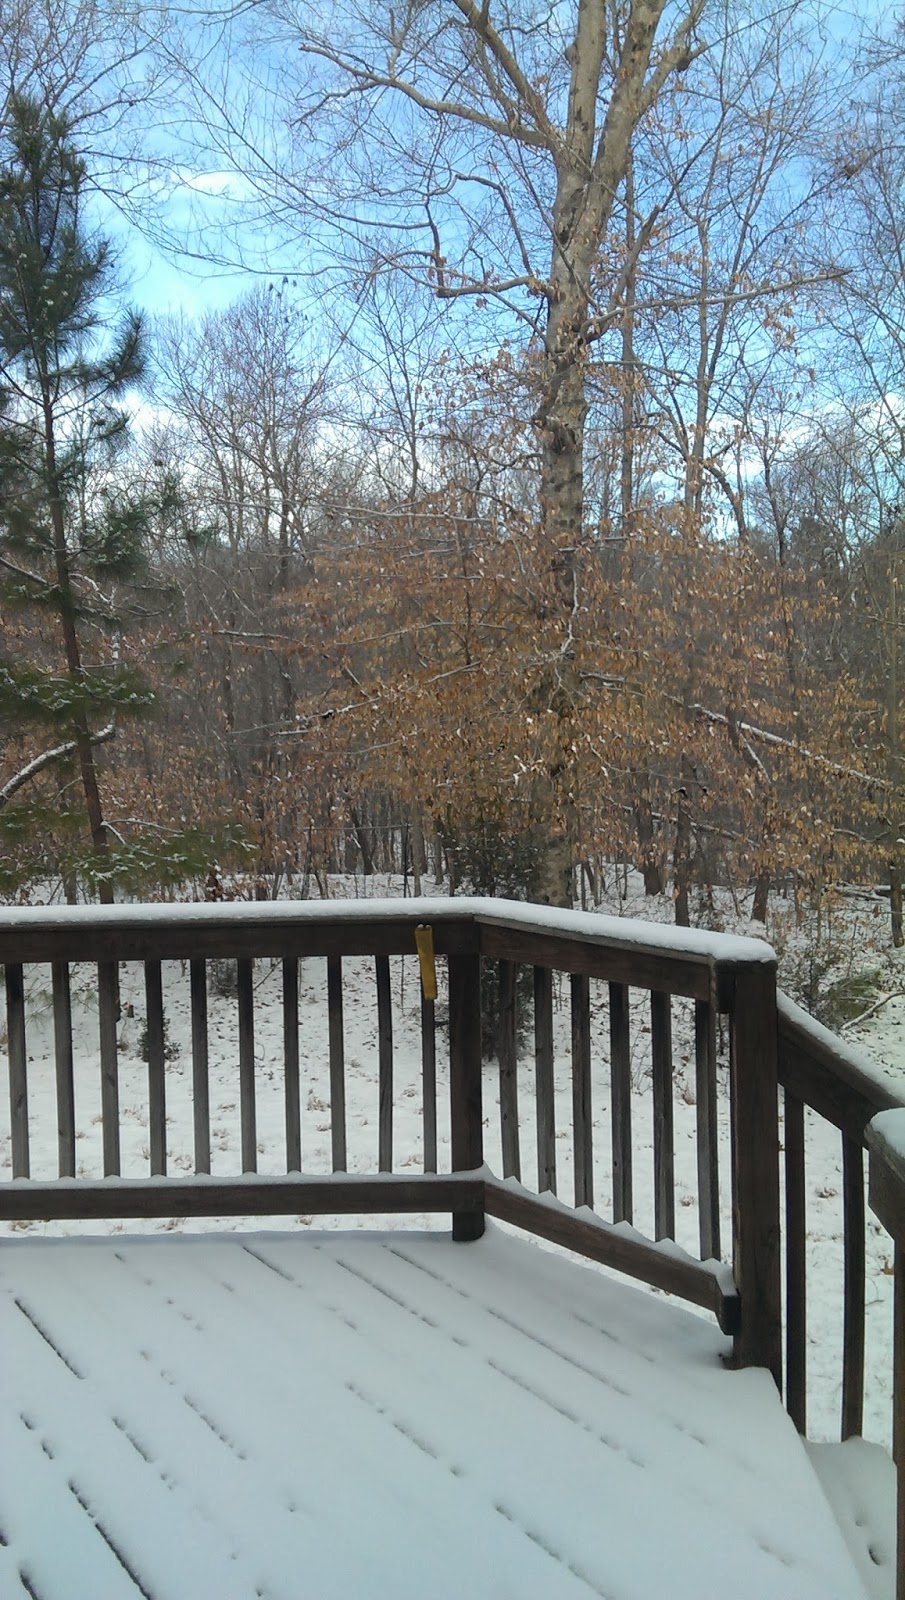 snow on the deck and back yard